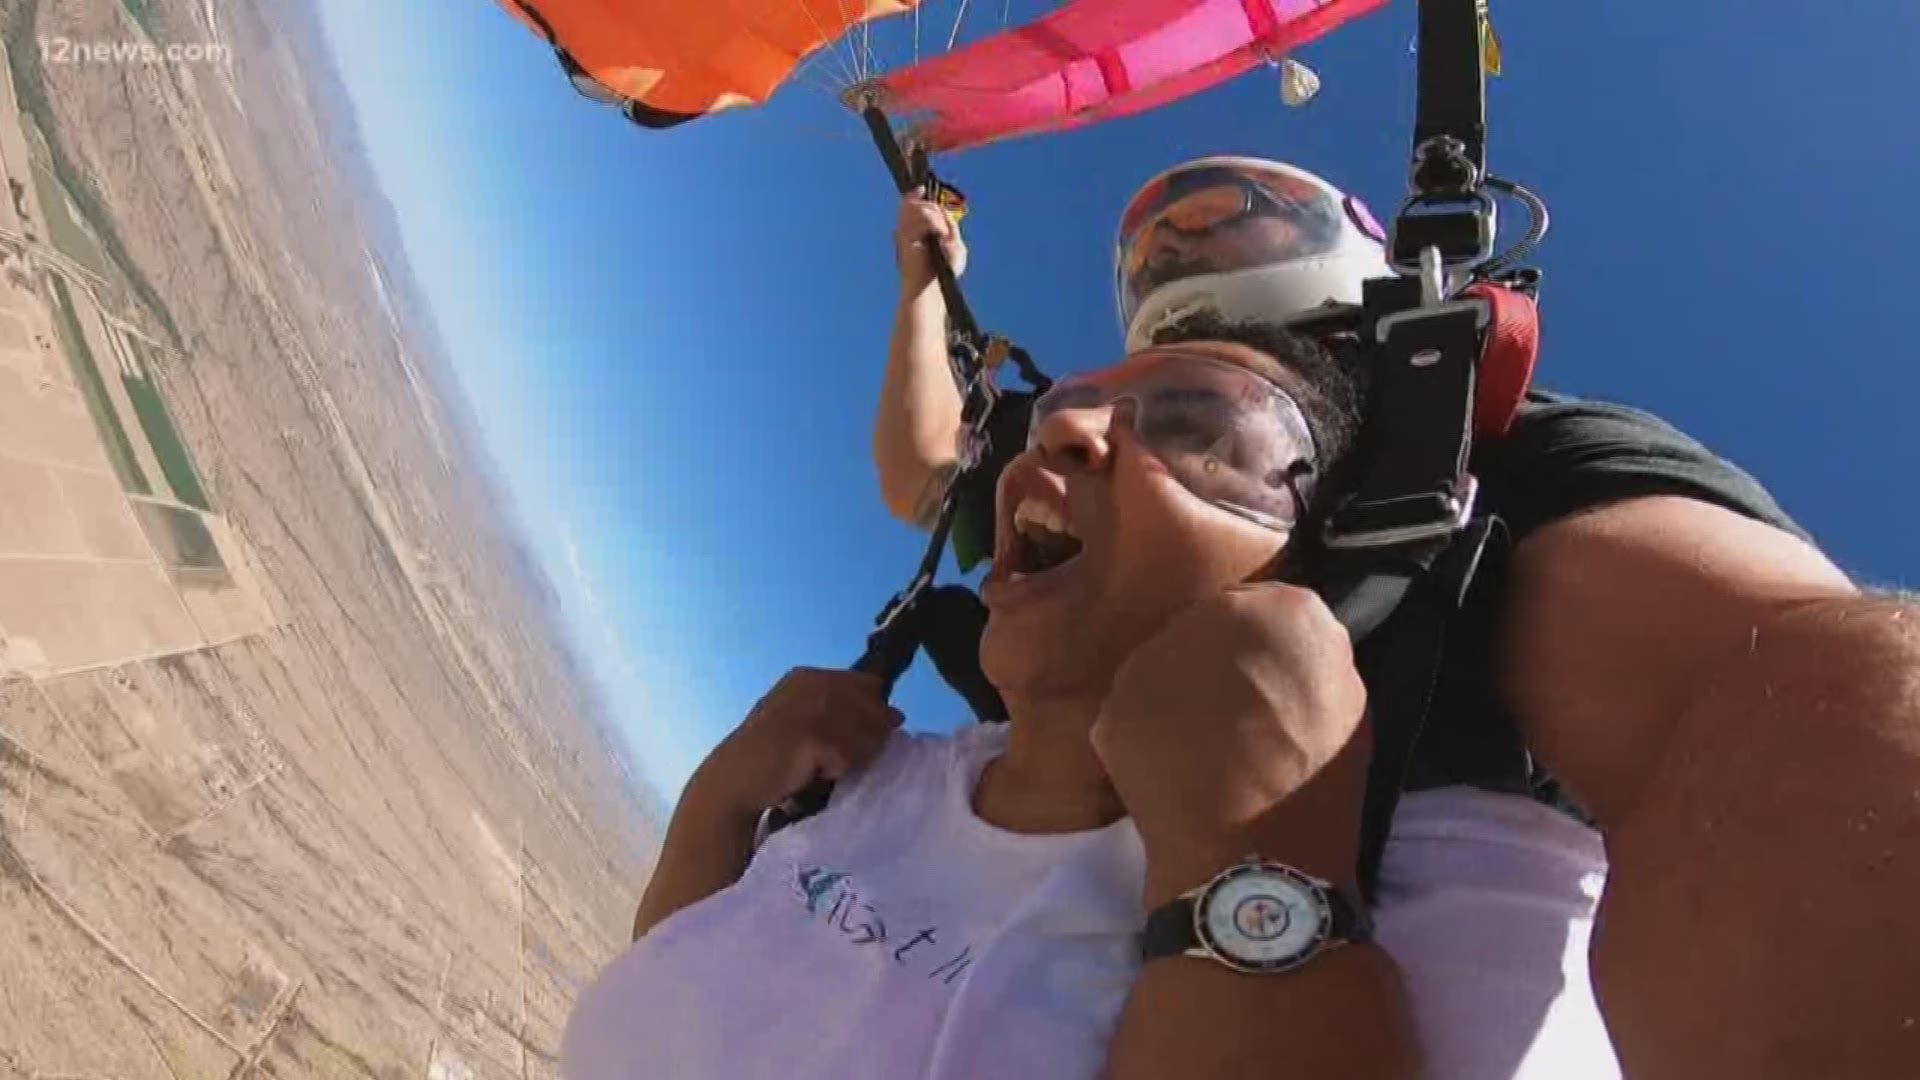 Watch: 104-Year-Old Woman Skydives From Plane In Record-Breaking Attempt